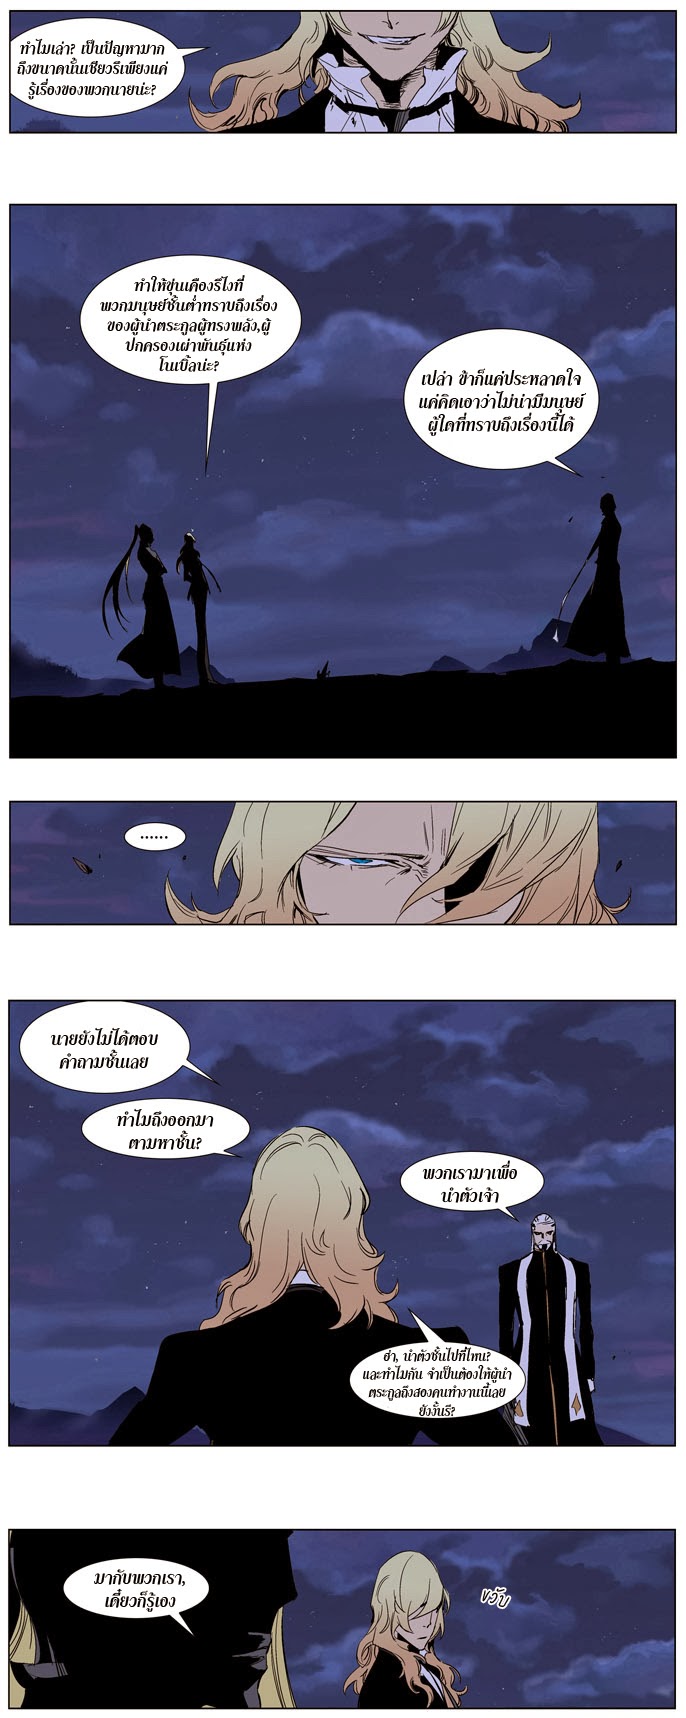 Noblesse 241 005